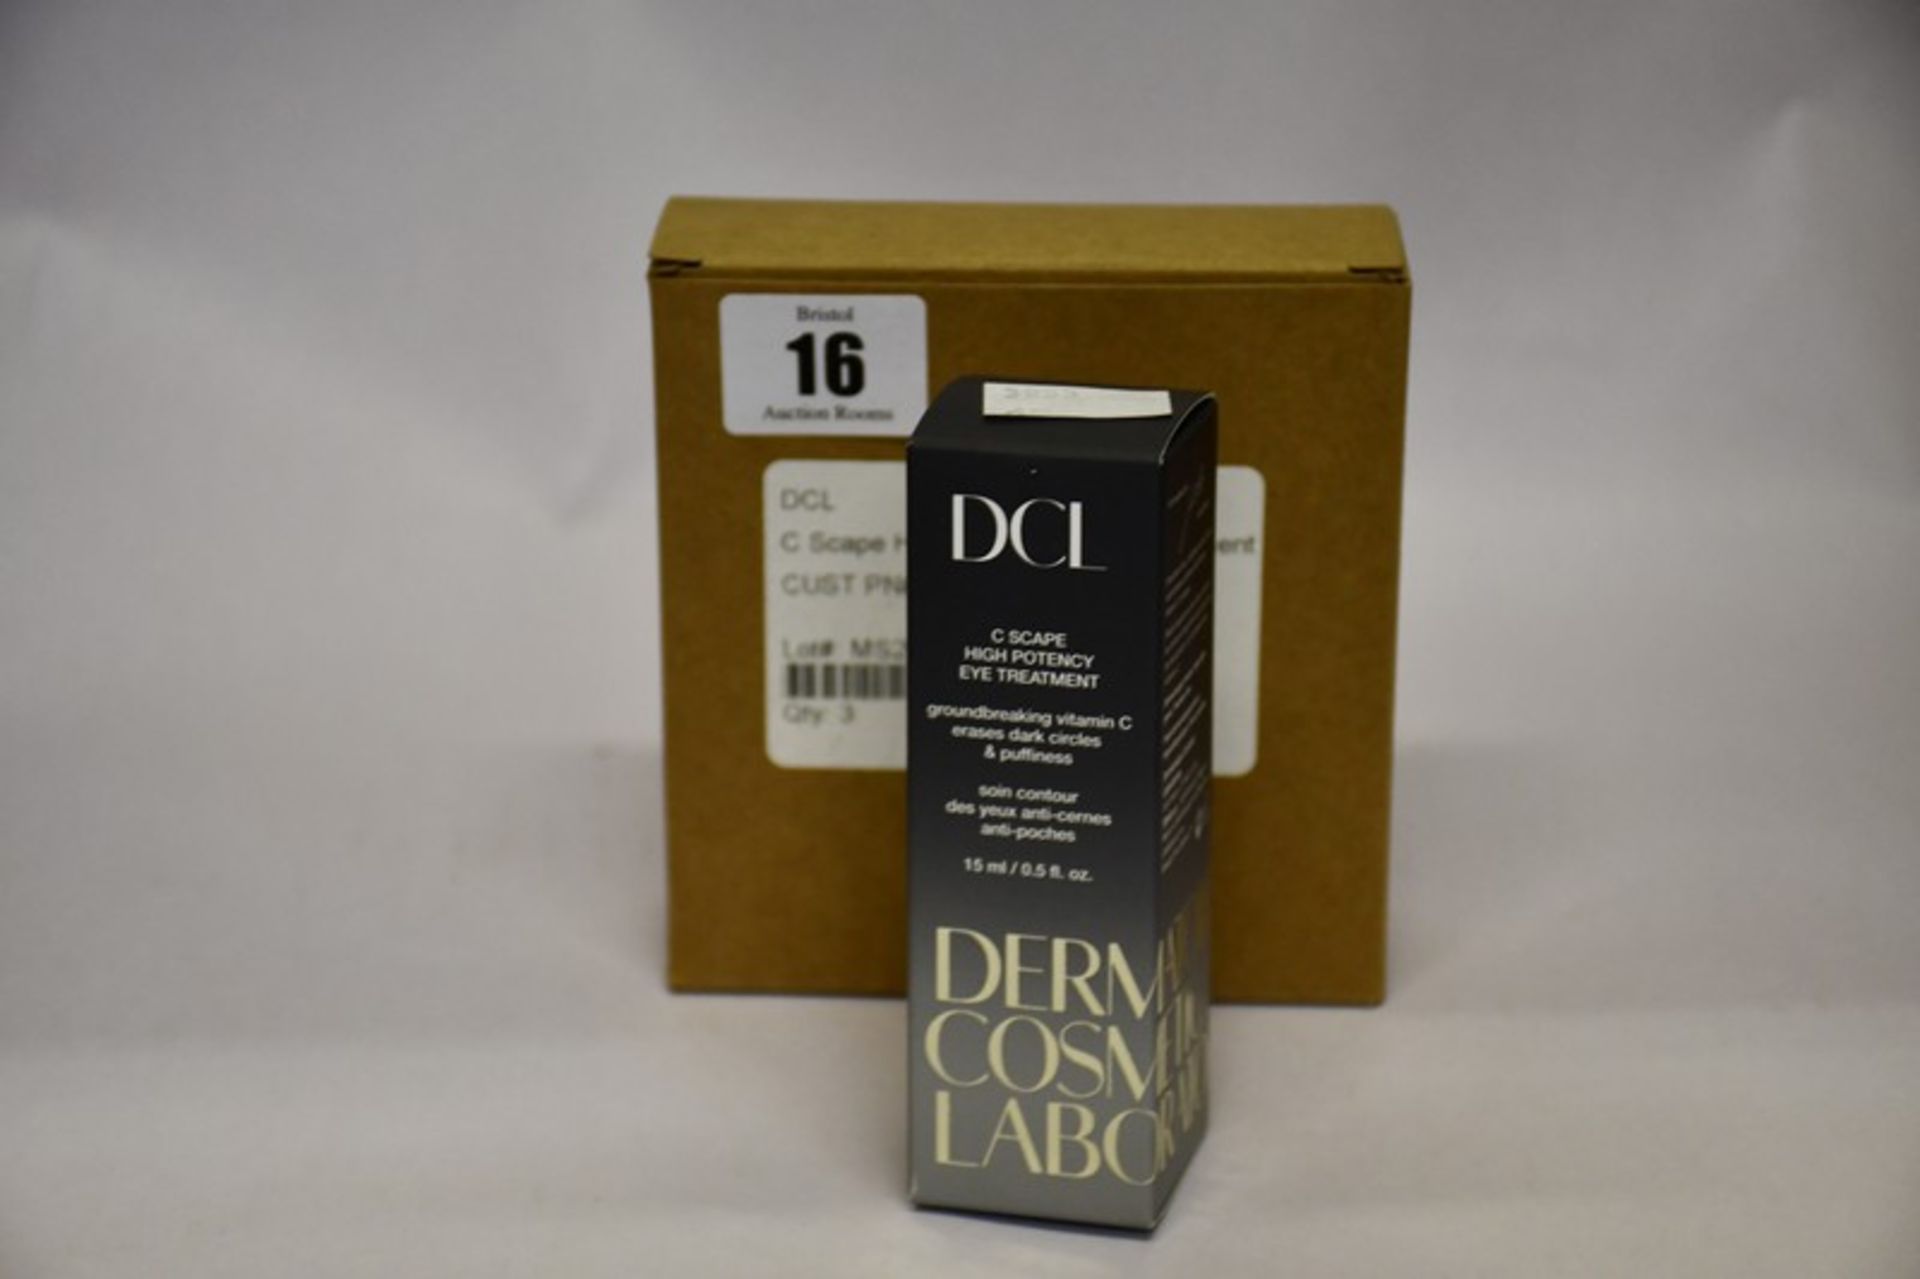 Three boxed as new DCL C Scape high potency eye treatments (15ml).